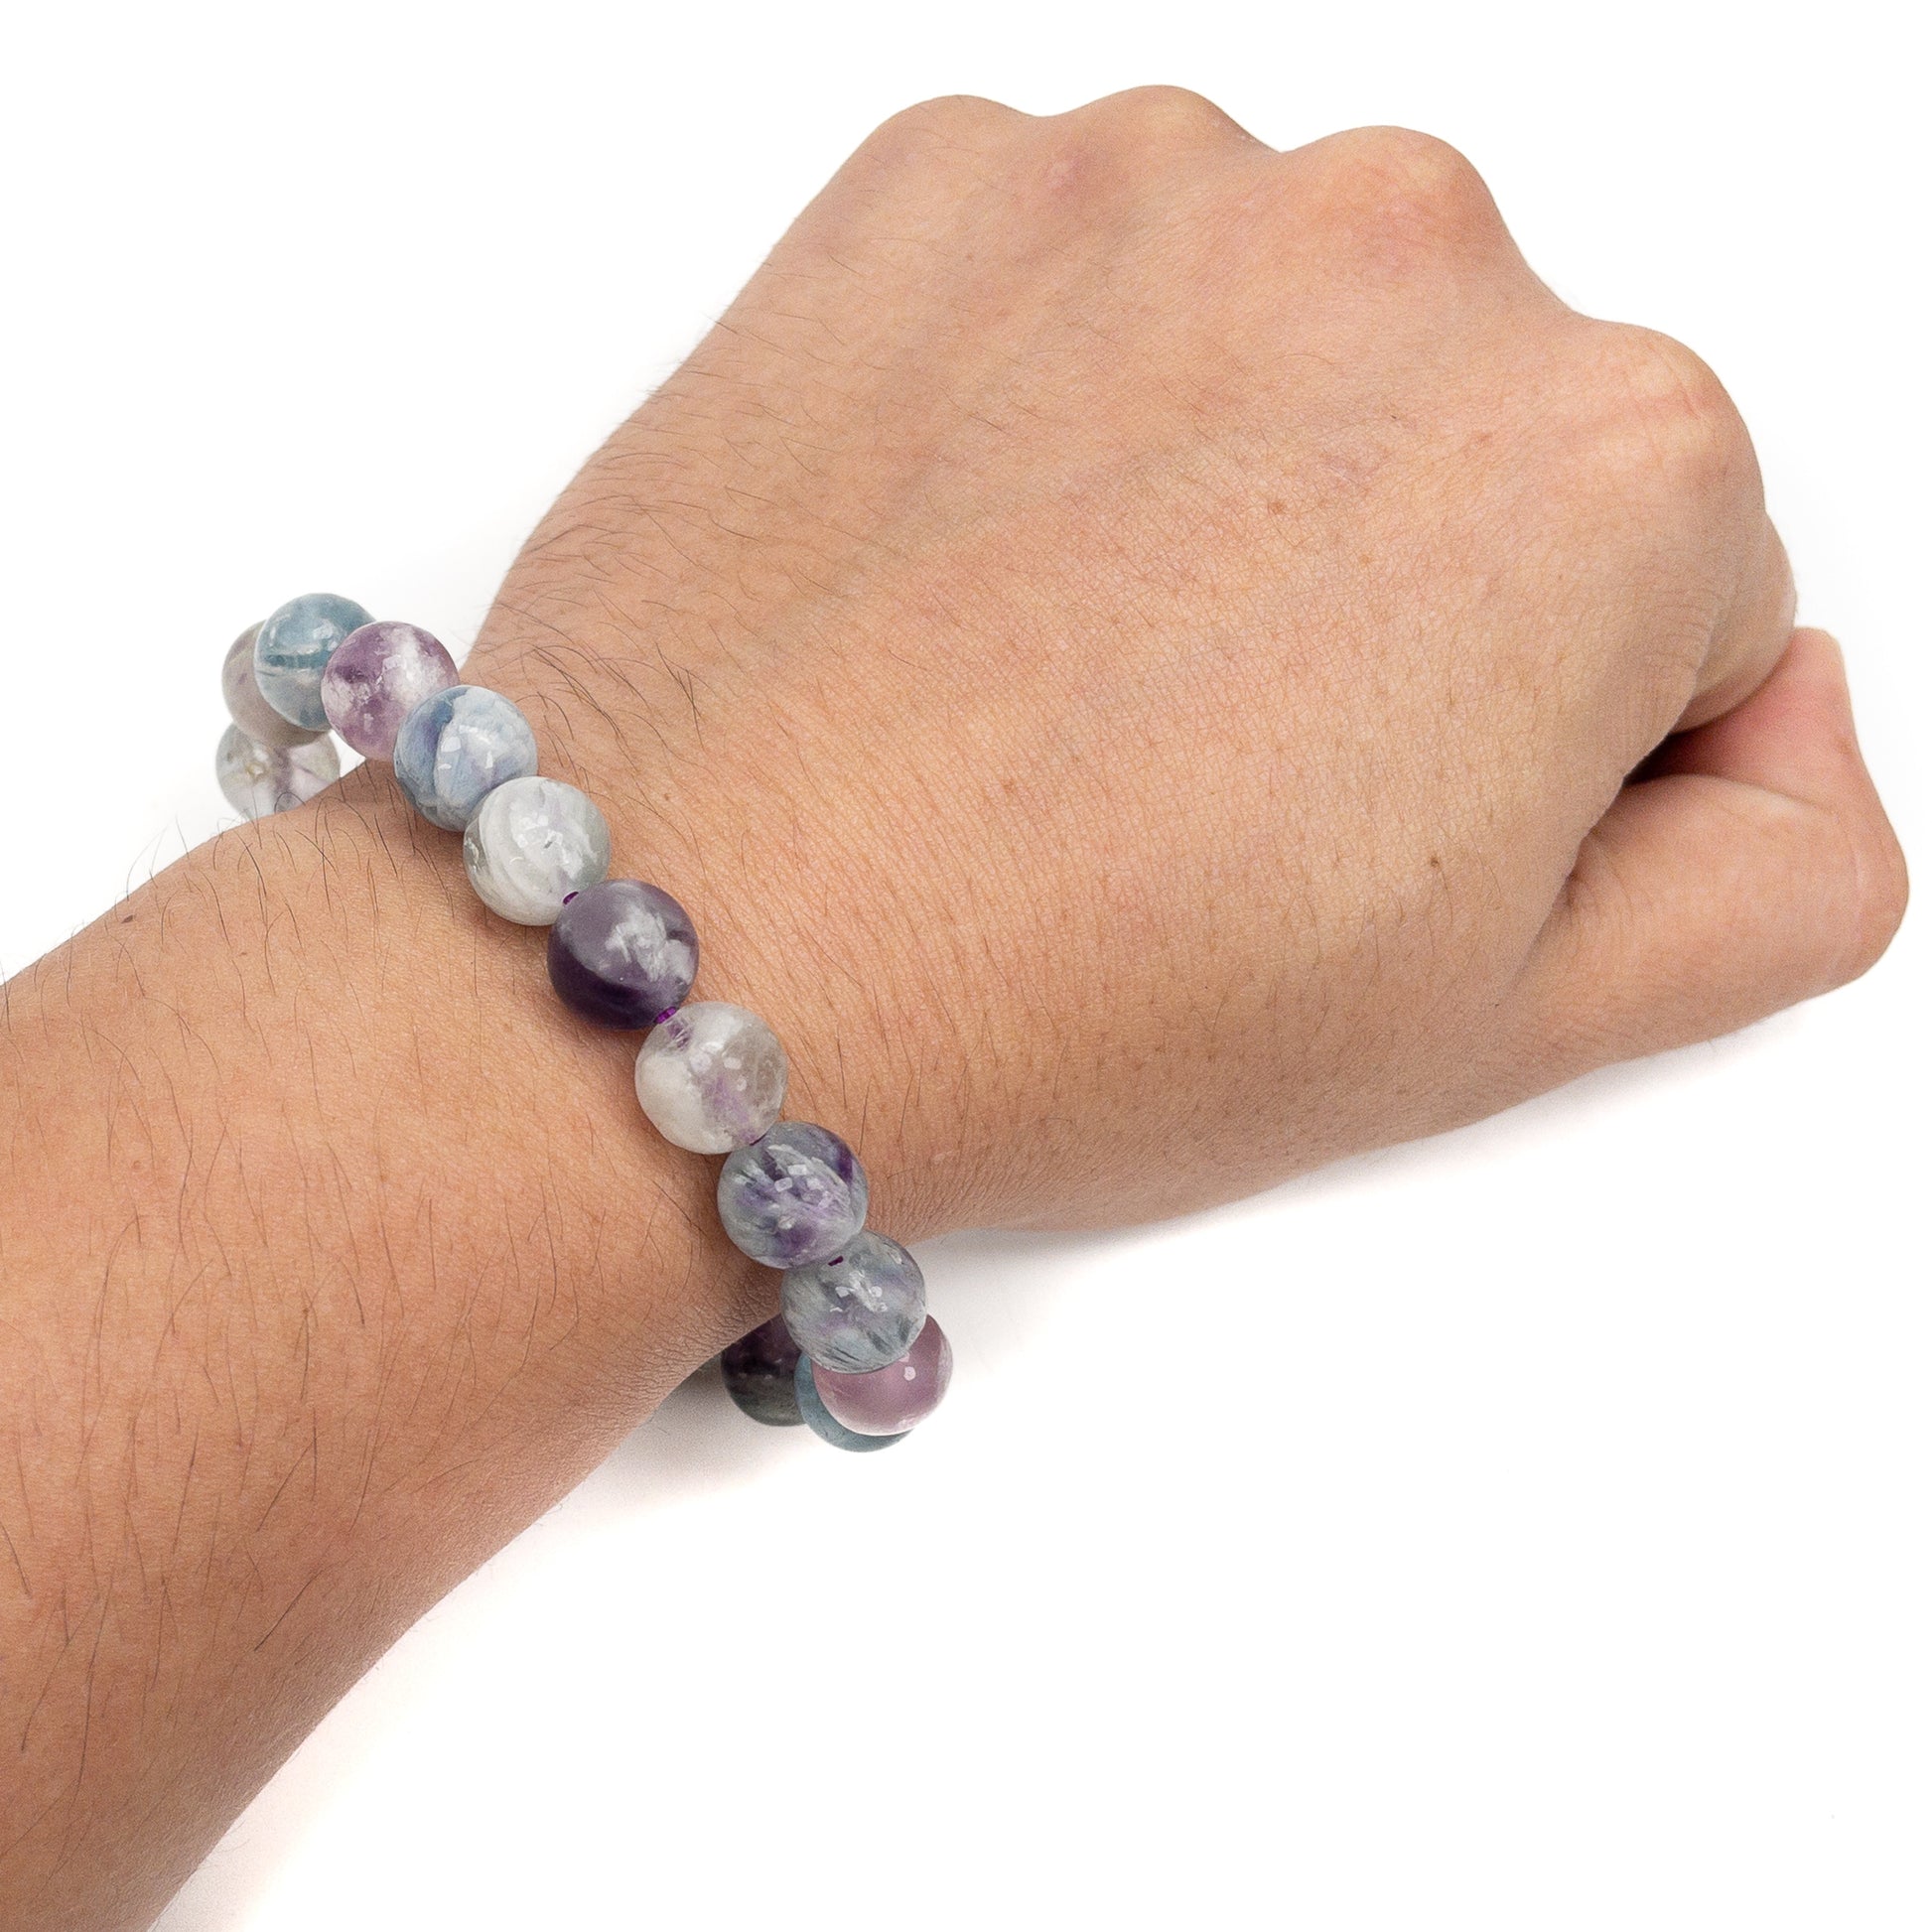 Angel Feather Fluorite Round Bead Stretchy Bracelet (2 Bead Sizes Available)